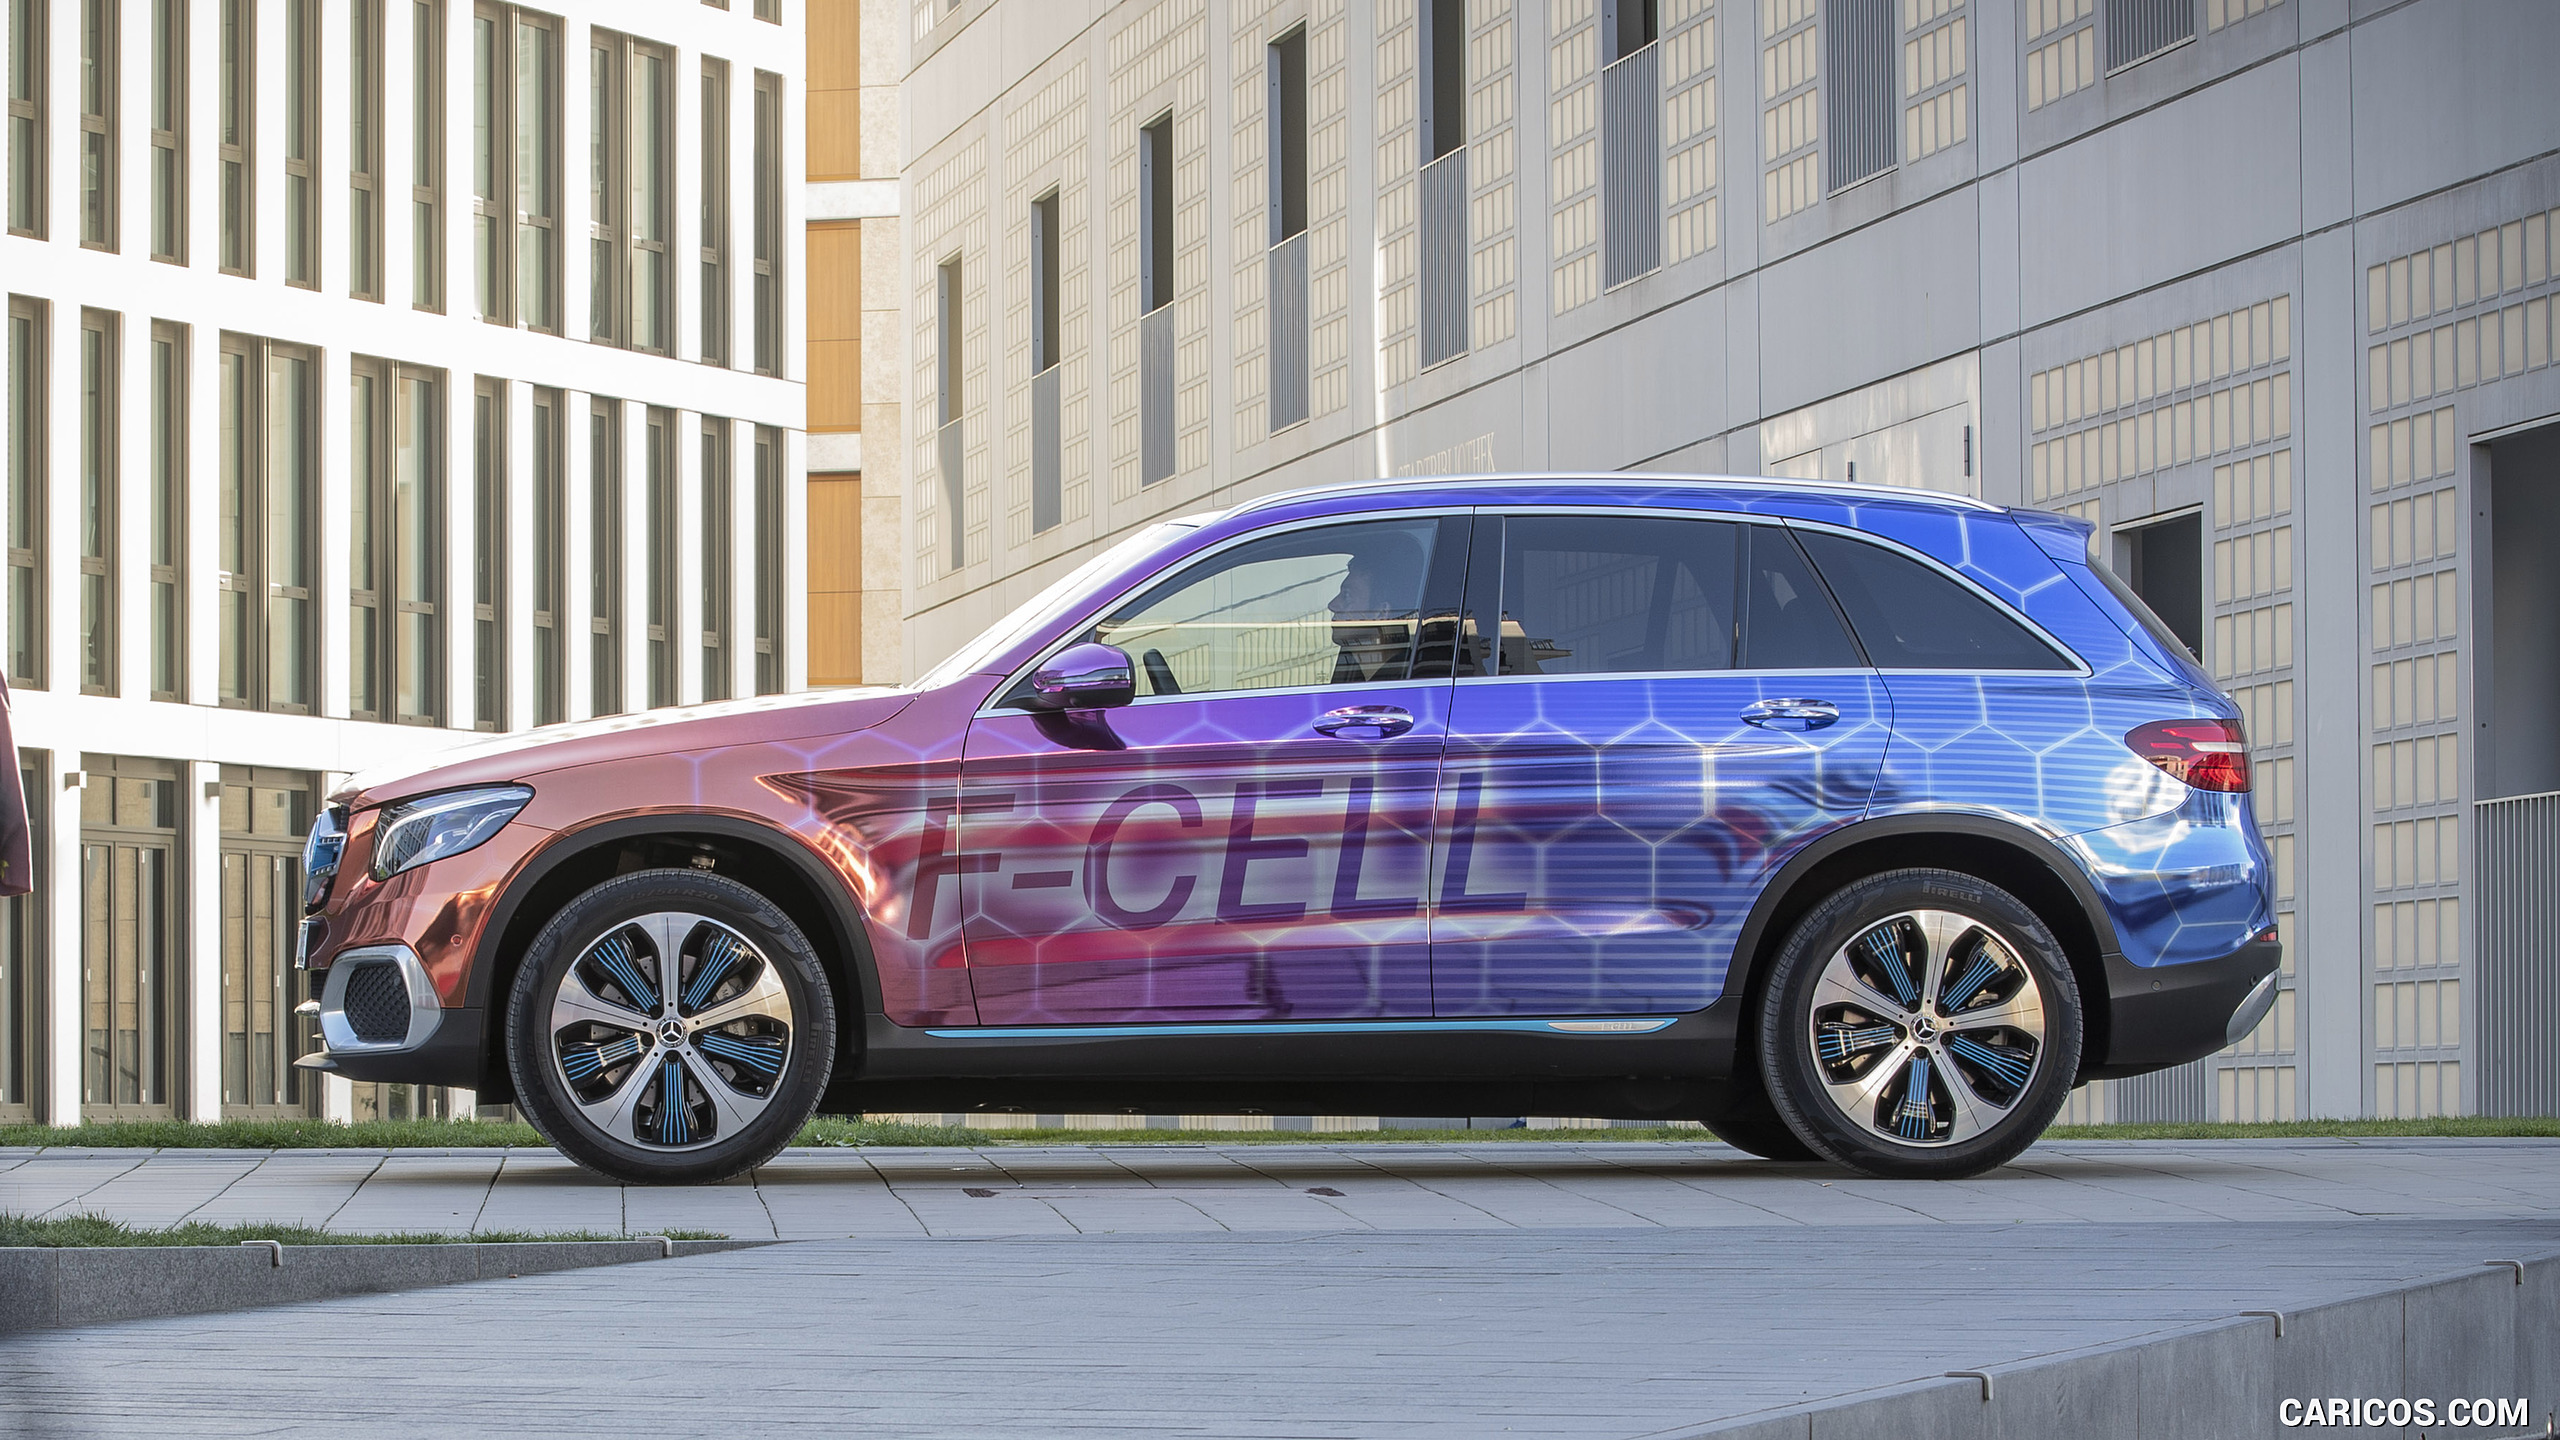 2019 Mercedes-Benz GLC F-CELL - Side, #70 of 95